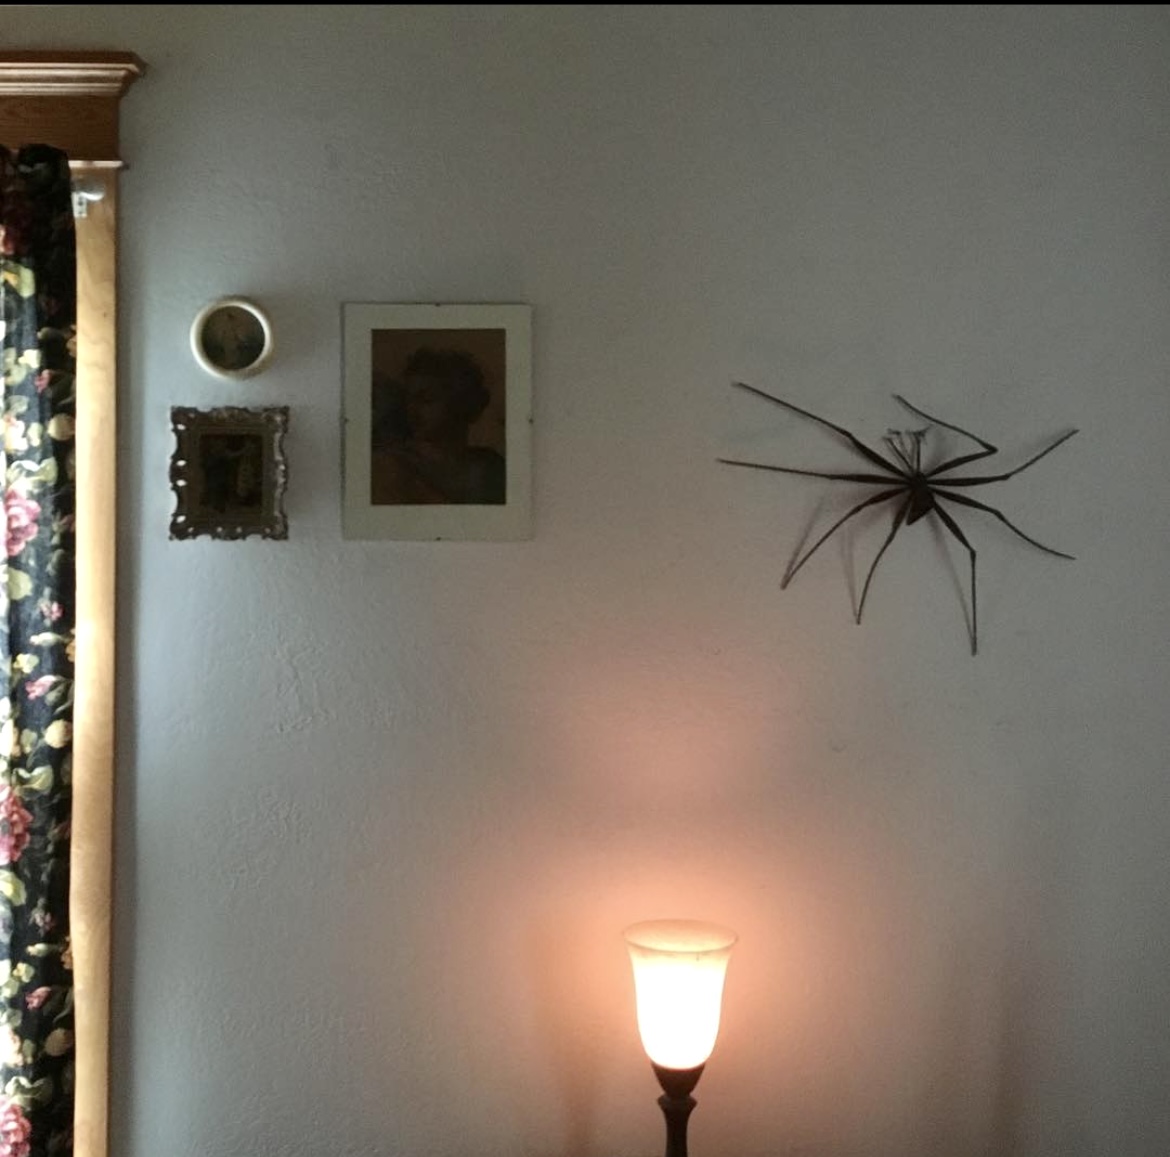 Linda's house: a floral curtain, soft pink lighting and a metal spider on the wall